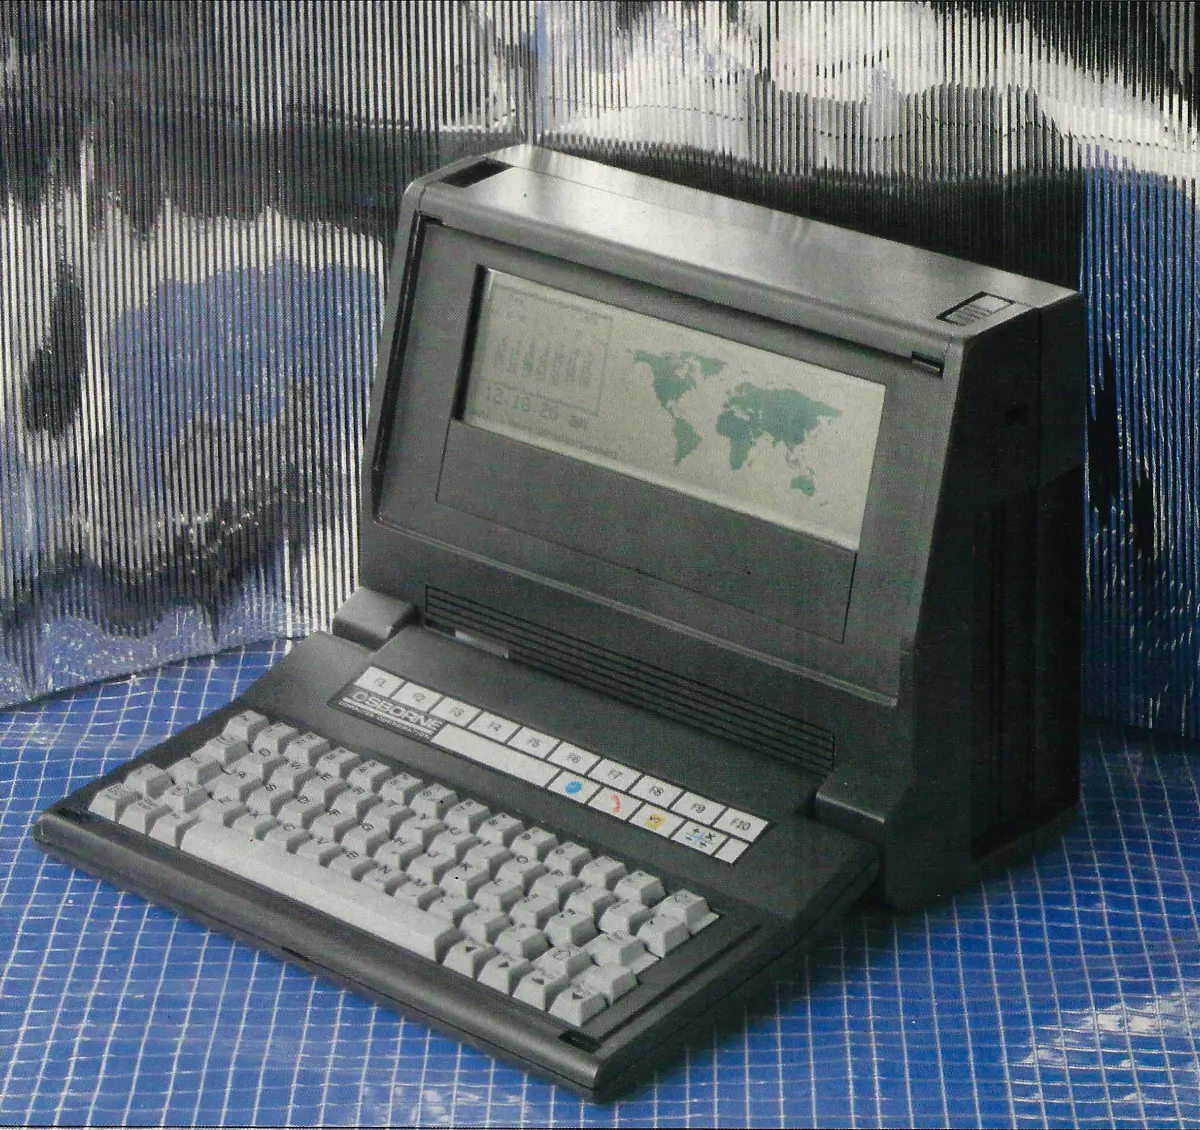 Osborne's Encore portable, released in 1984. From Personal Computer World, August 1984